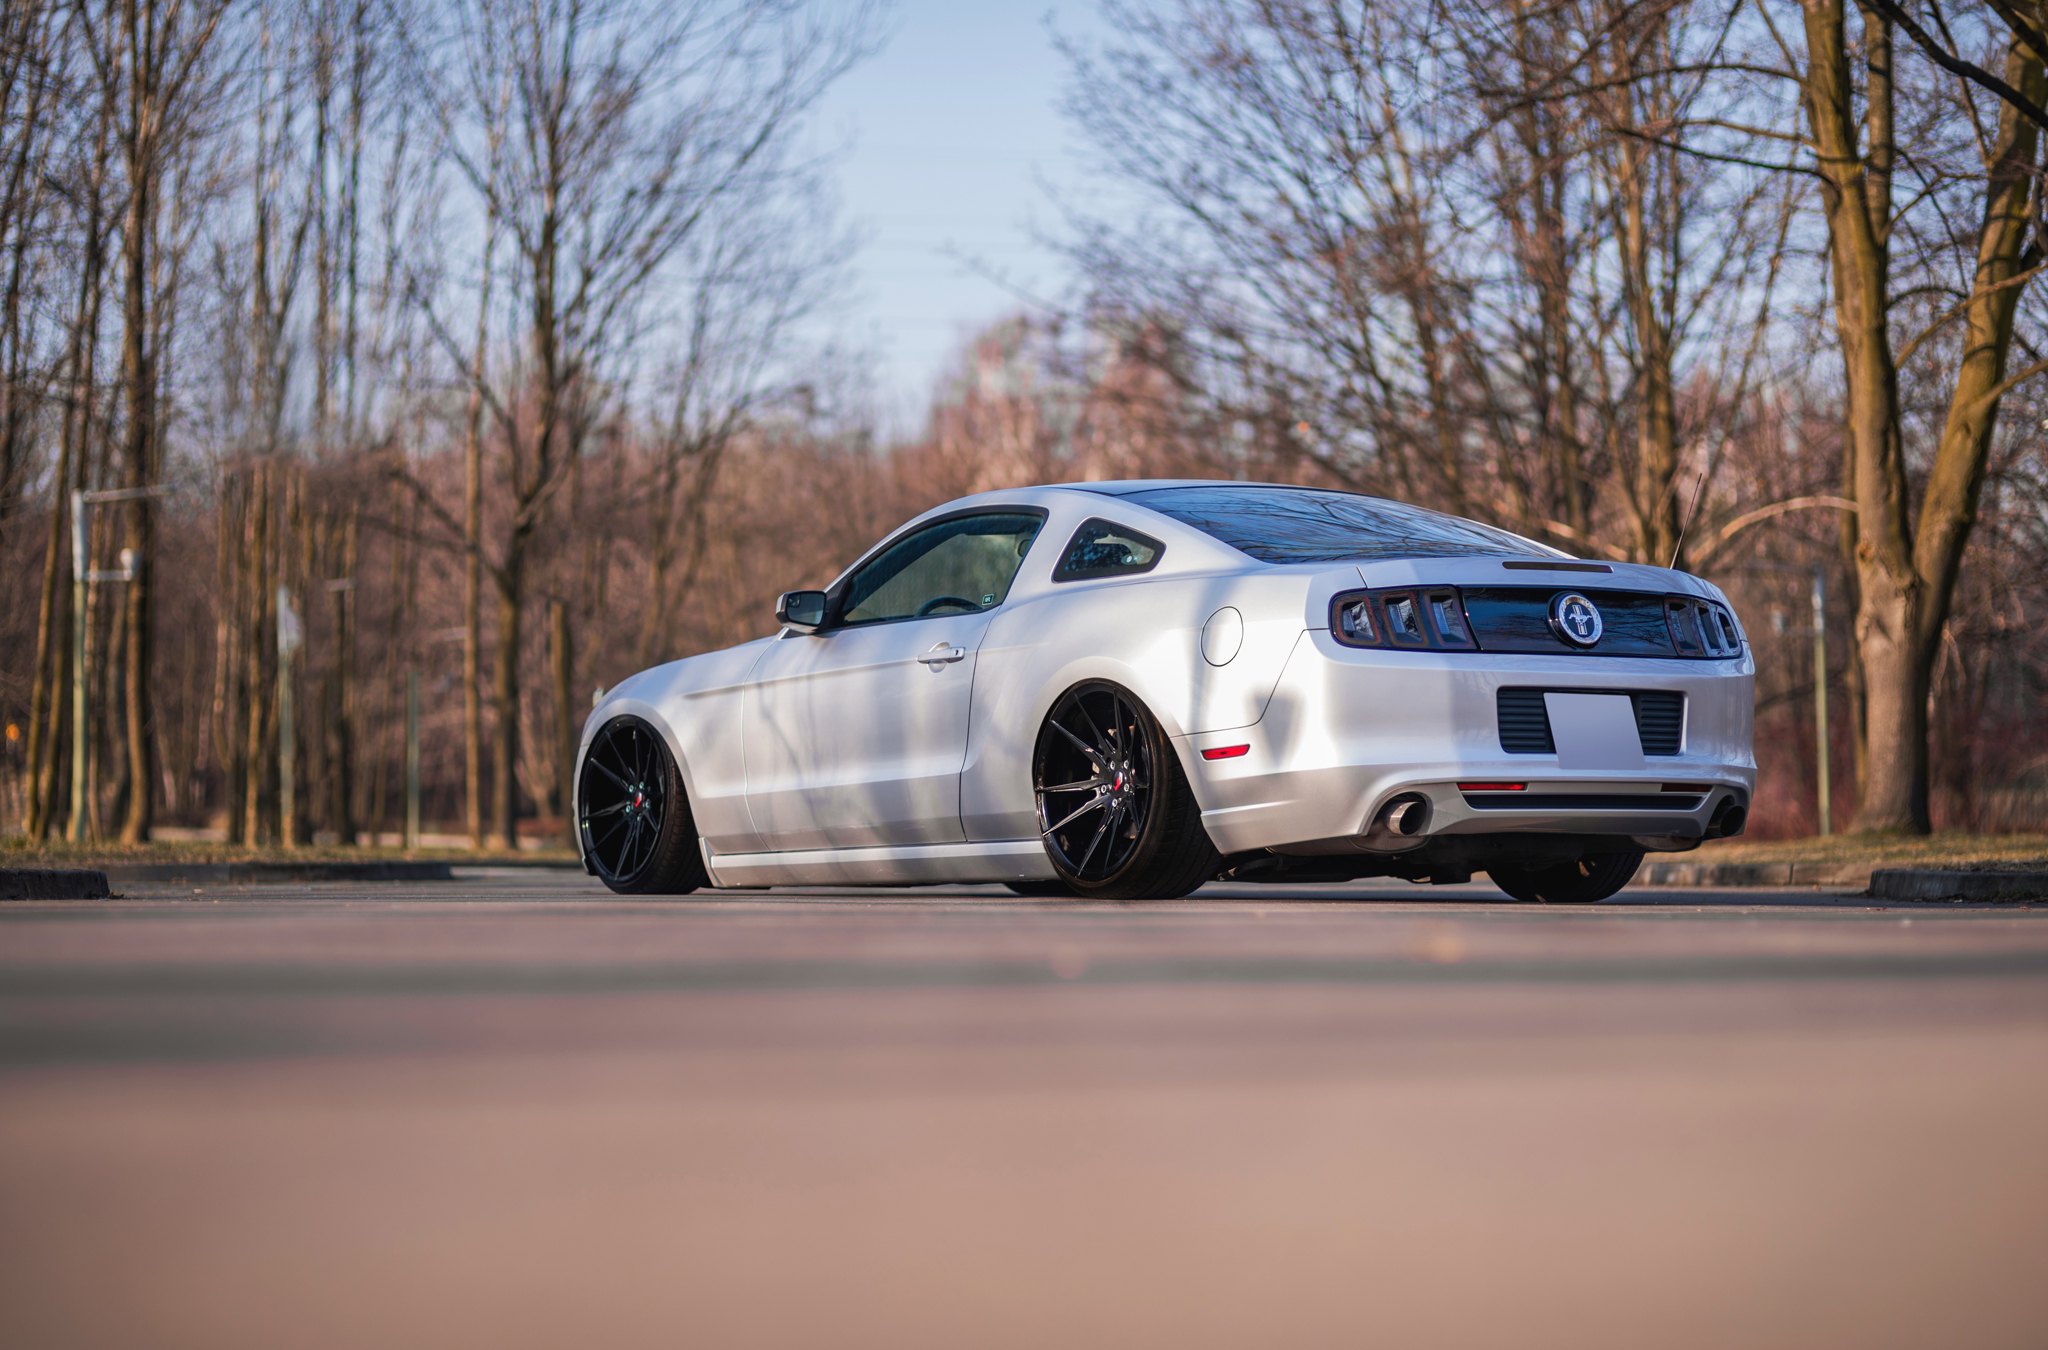 Gray Ford Mustang with Aftermarket Rear Diffuser - Photo by JR Wheels